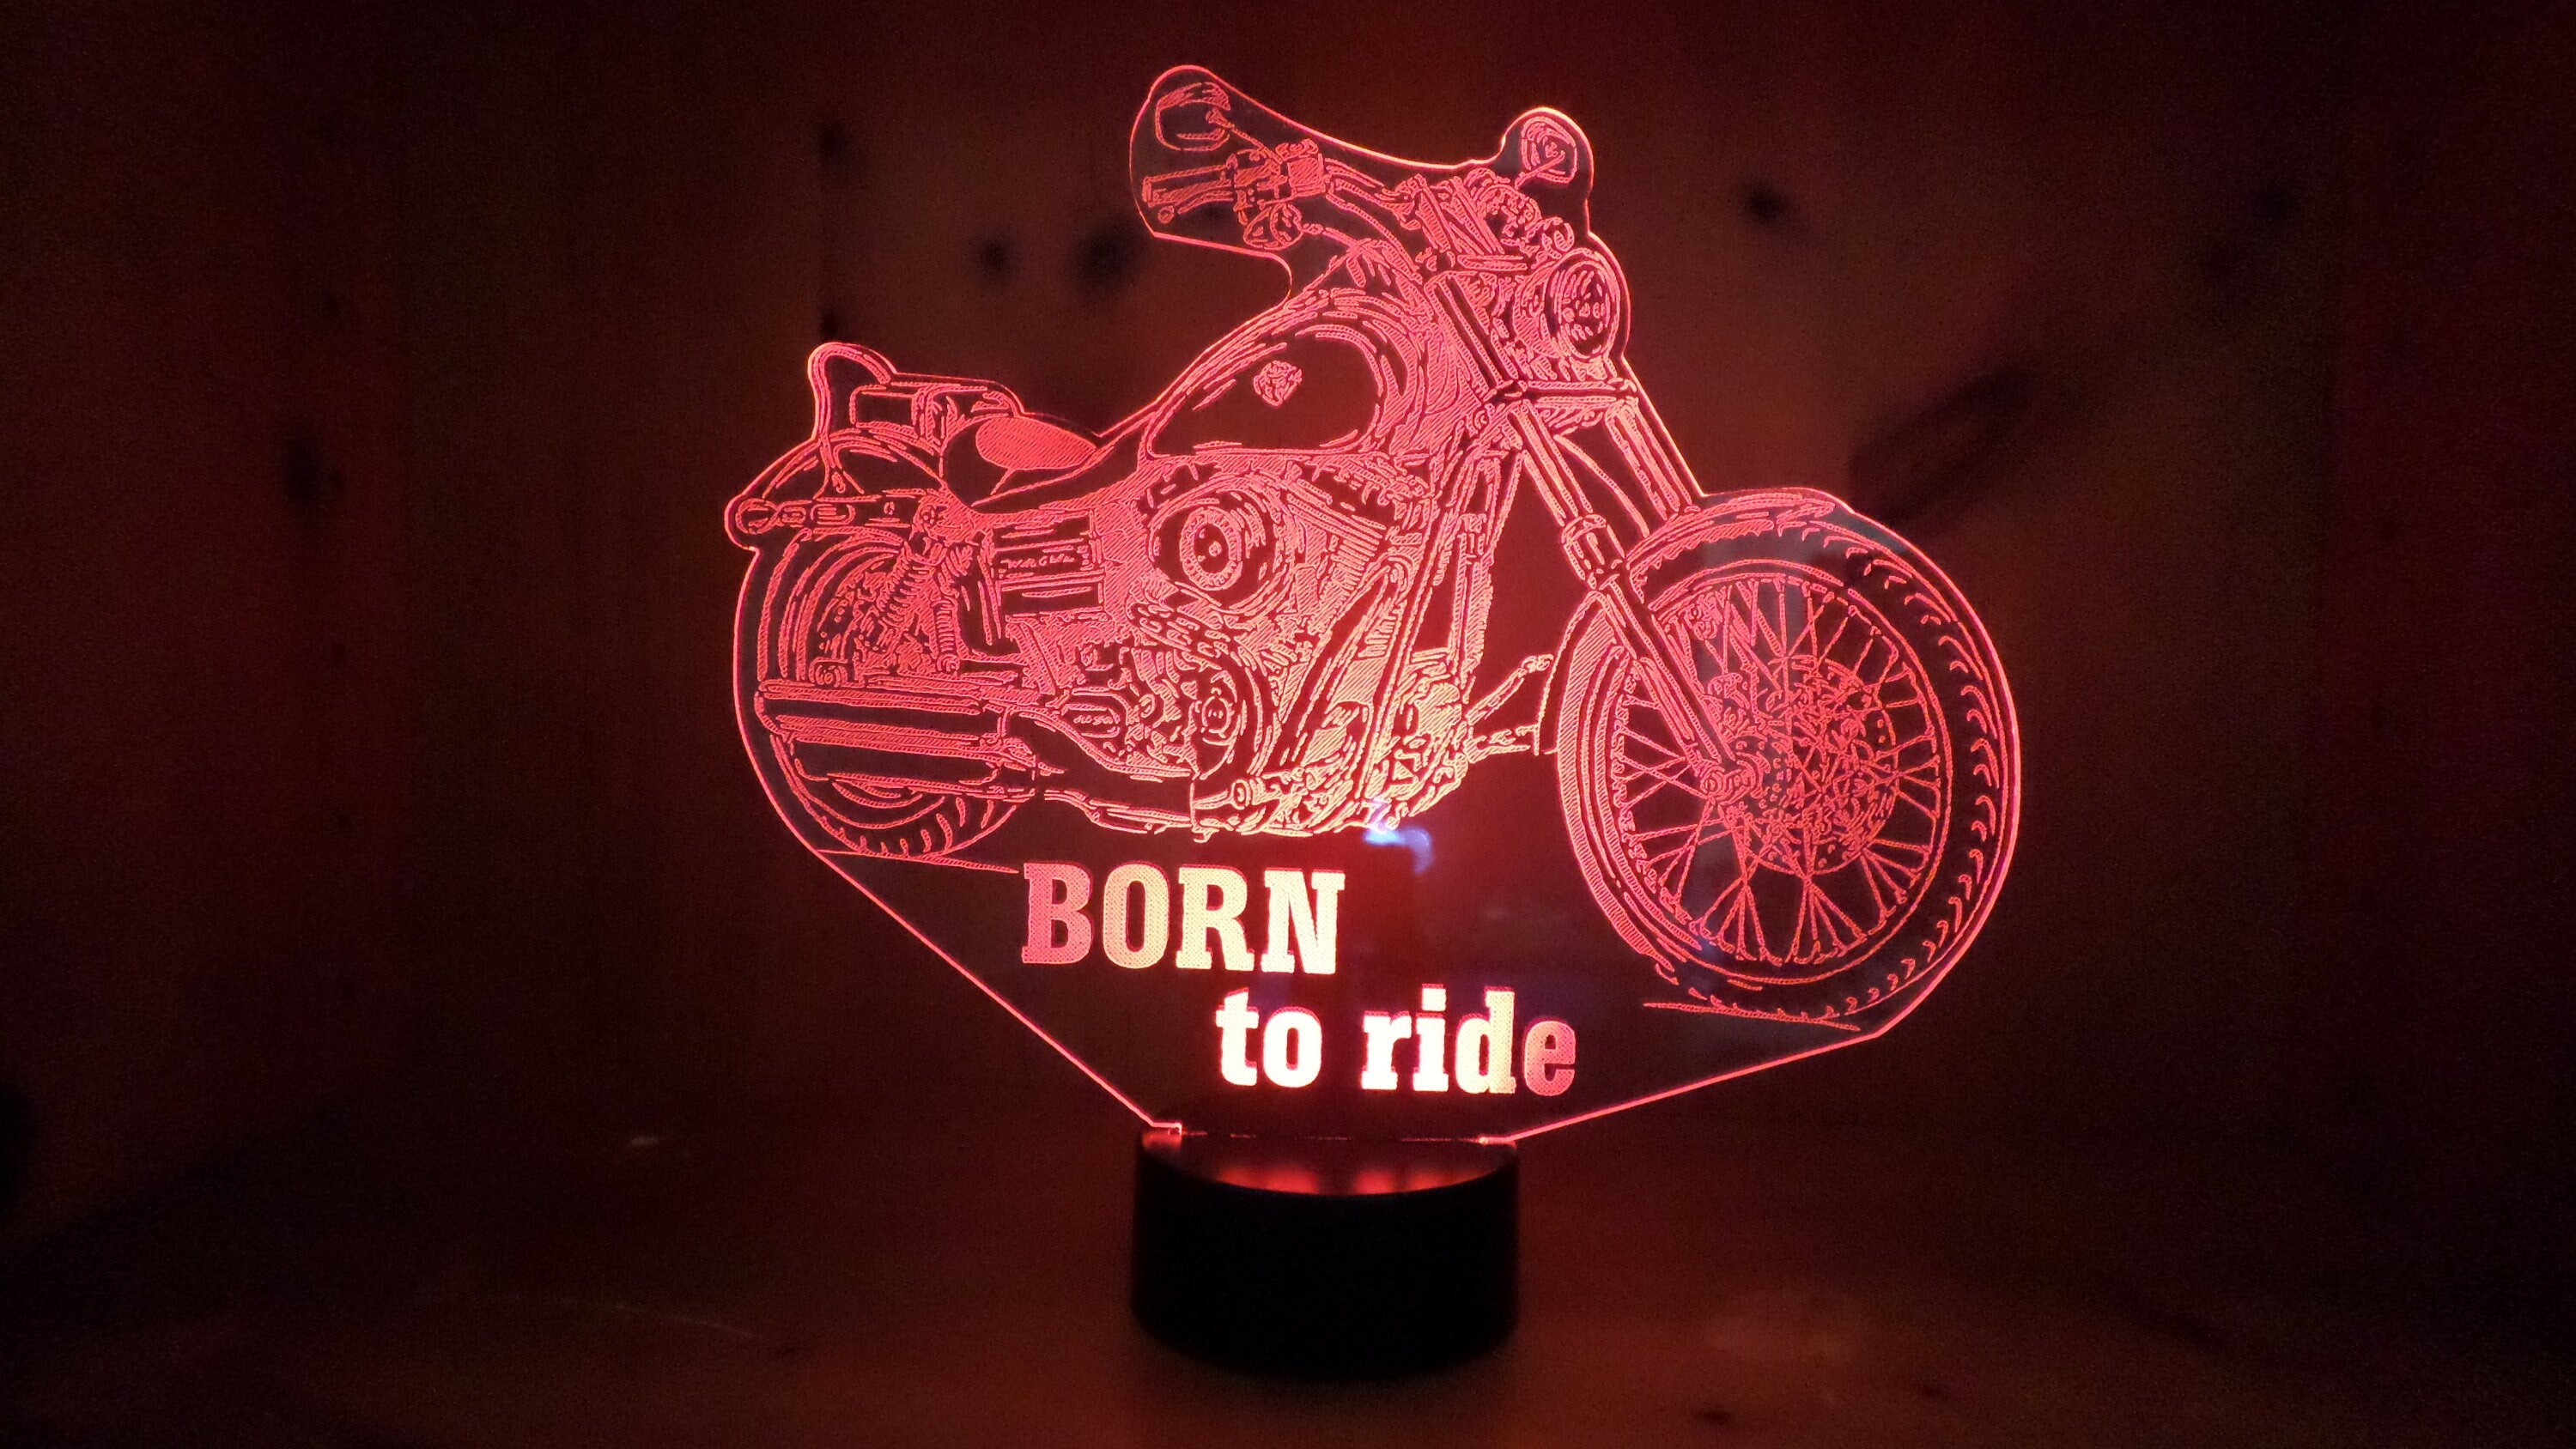 Awesome "BORN to Ride" Motorcycle 3D lamp (1082) - FREE SHIPPING!